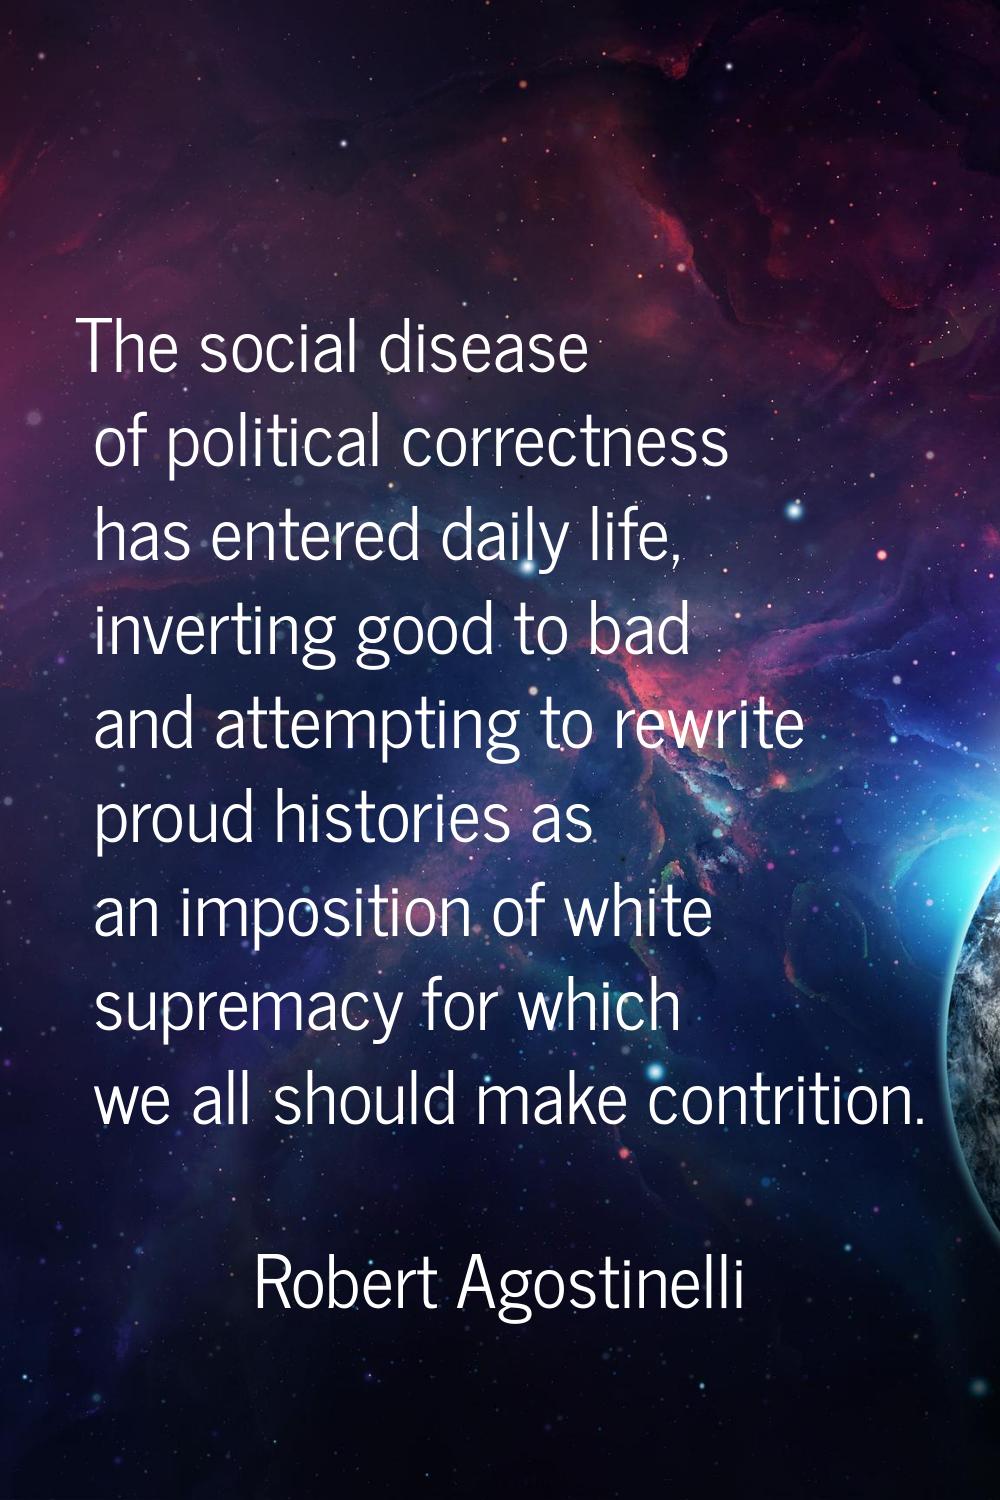 The social disease of political correctness has entered daily life, inverting good to bad and attem